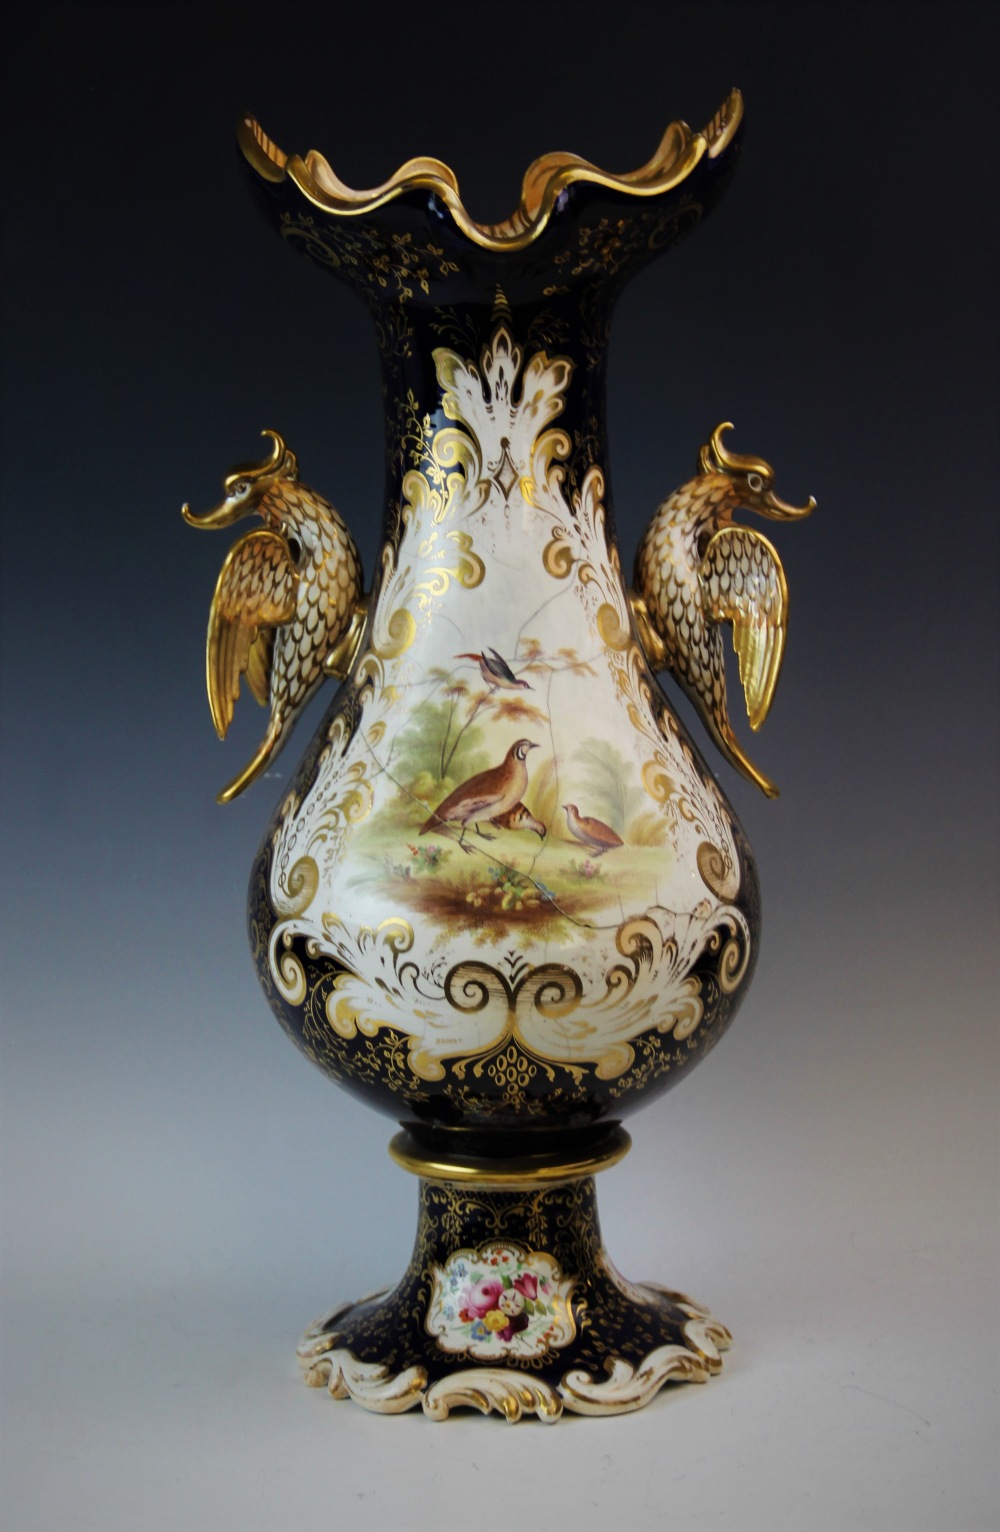 An impressive English porcelain rococo style vase, mid 19th century (probably Coalport), the - Image 2 of 4